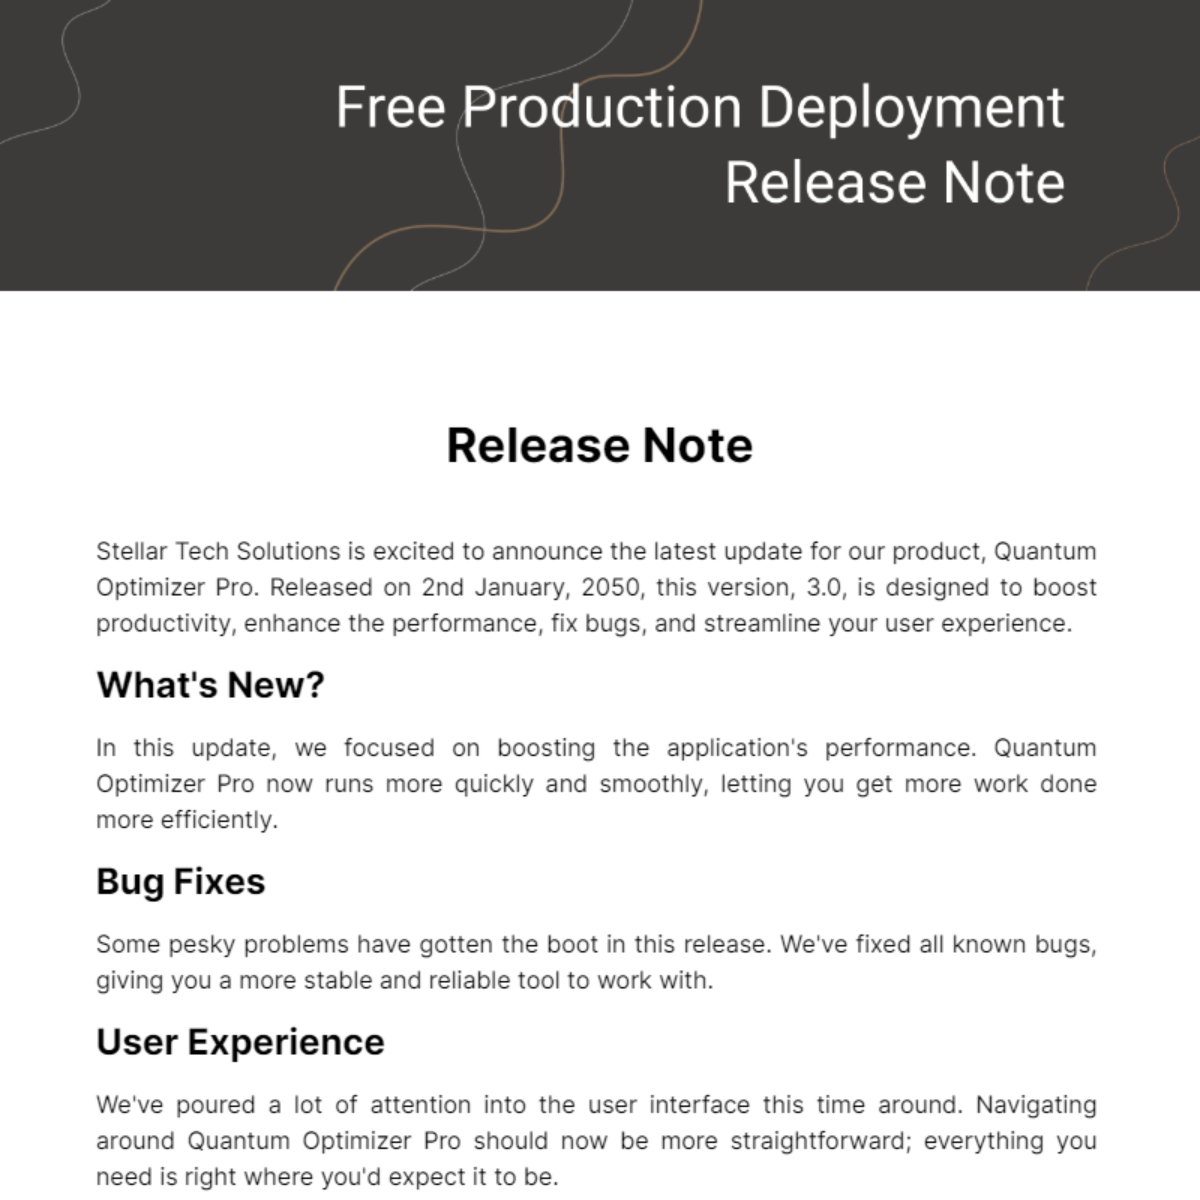 Production Deployment Release Note Template